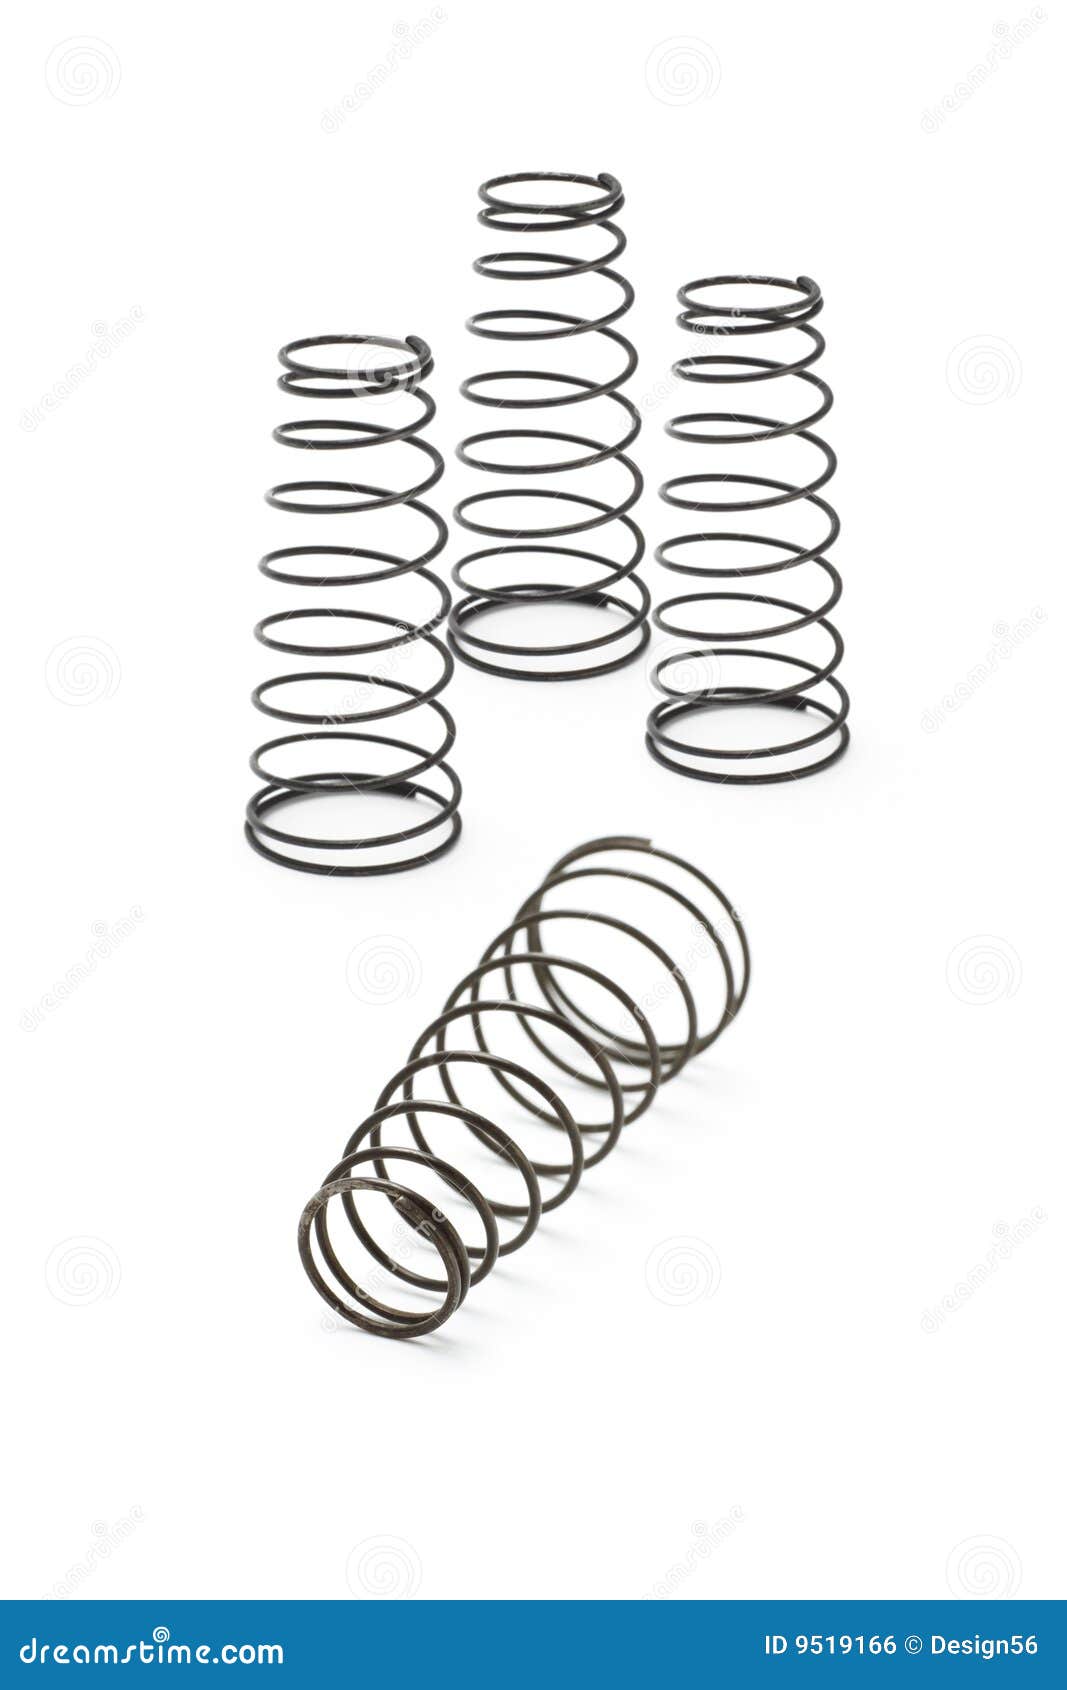 clipart coil spring - photo #39